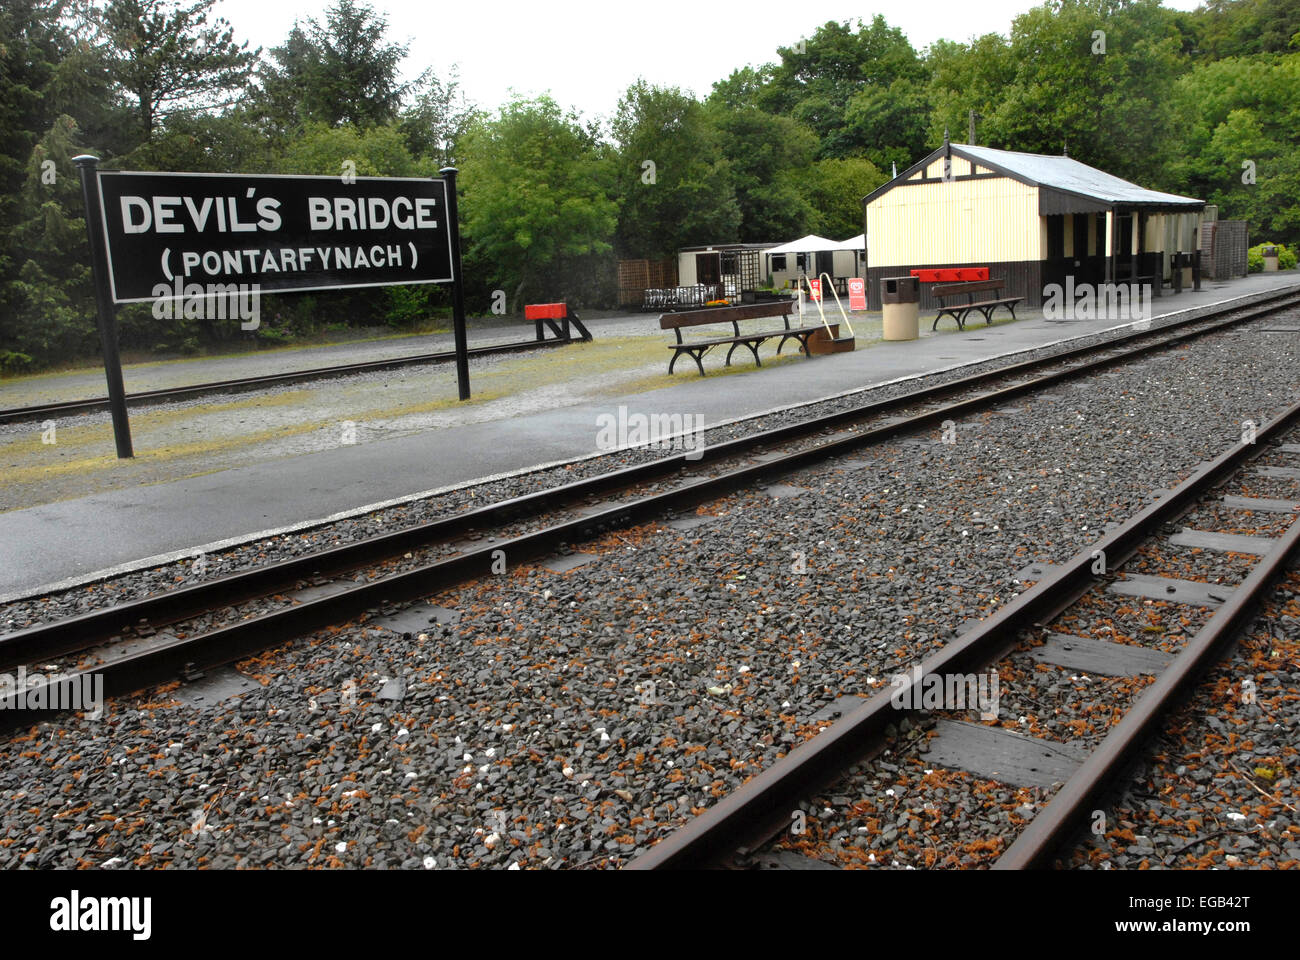 Devil's Bridge station with the sign in Welsh and English. The narrow track railway  runs from Aberystwyth to this terminus. Stock Photo